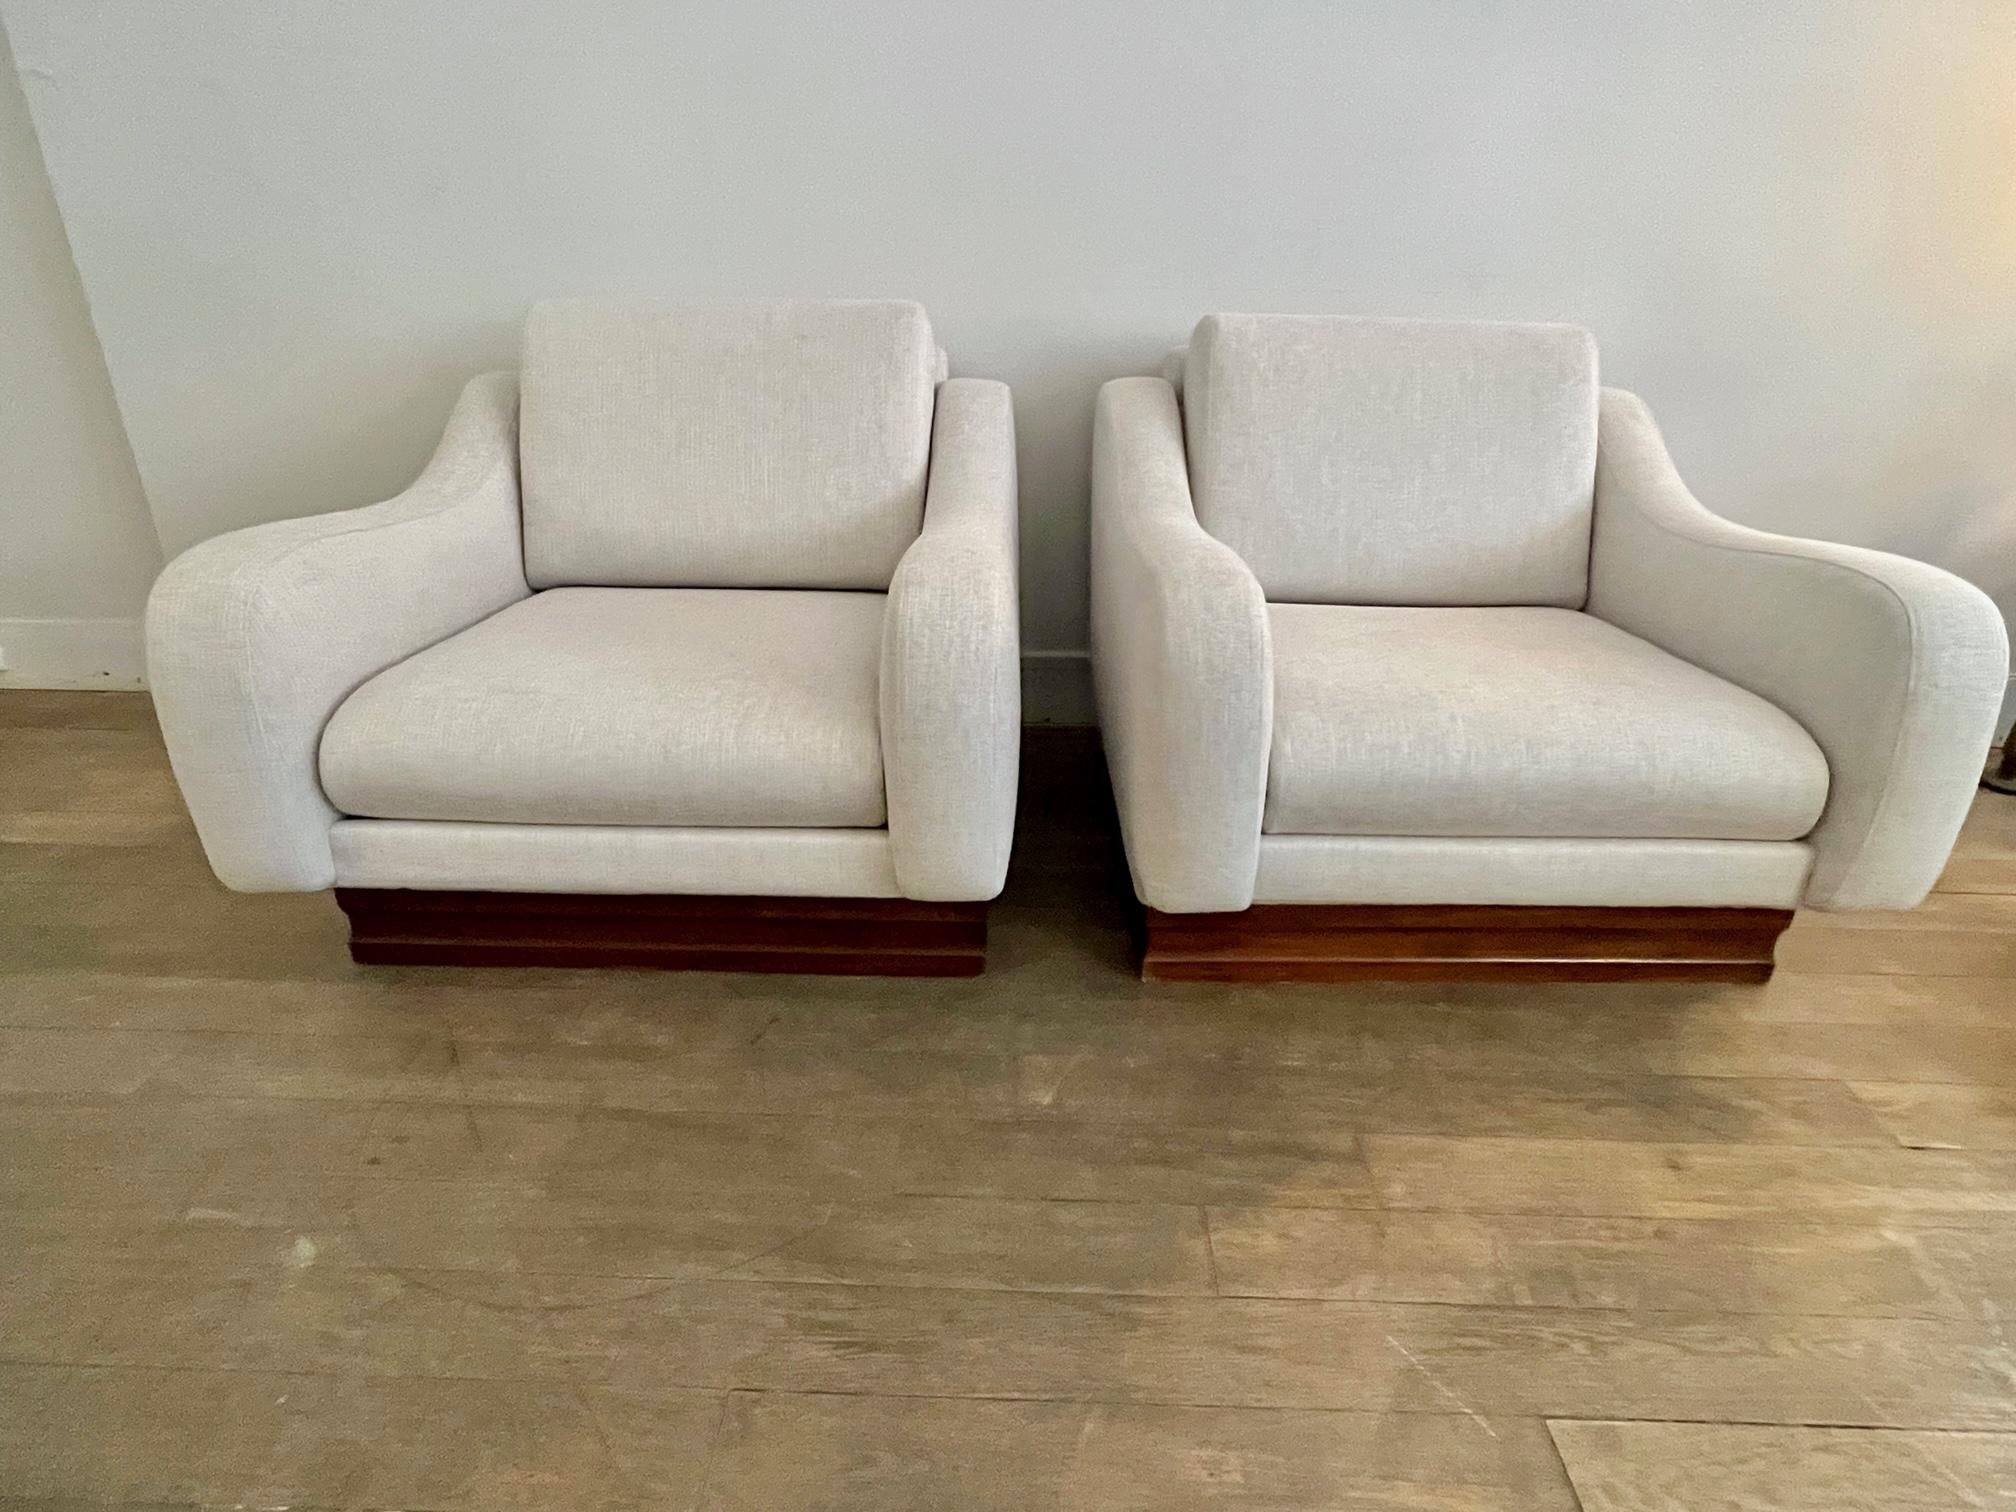 Pair of lounge chairs designed by Paolo Caliari ( 1932 - 2004) 
For the Italian design house Cassina
Plinth in massif wood. 
Newly Re-upholstered 
Italy, circa 1960

Bibliograpy : ALAIMO, Davide, Mobili : Di architetti e progettisti torinesi